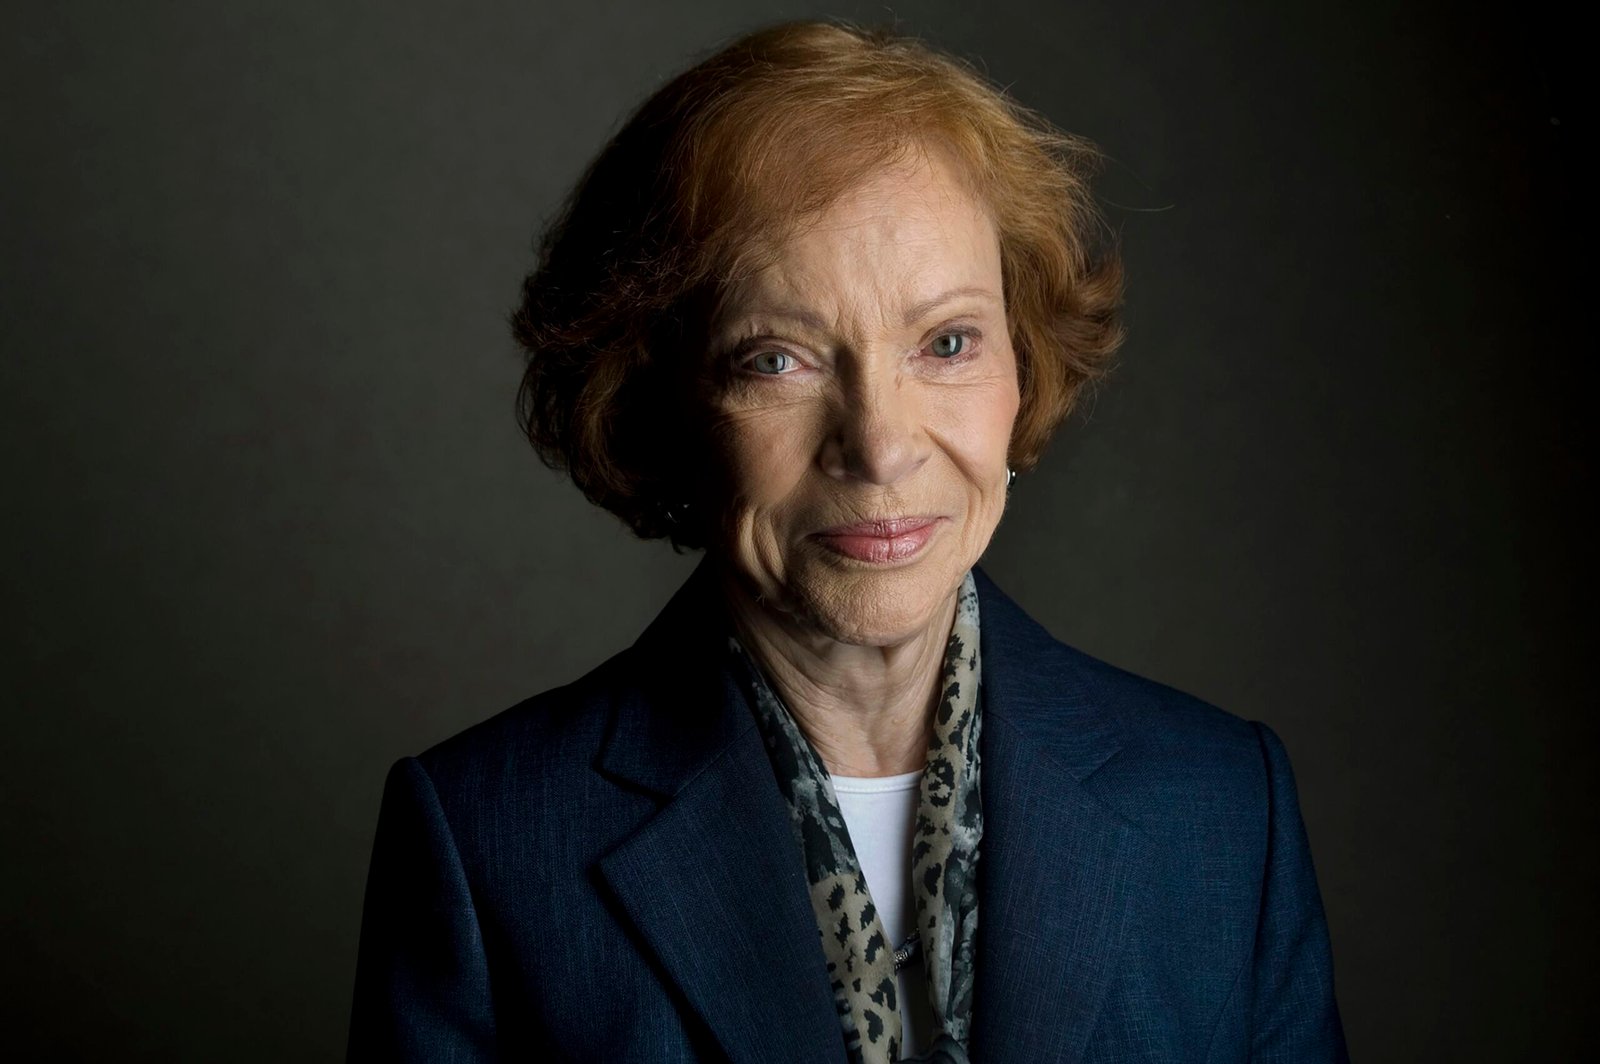 The Remarkable Life and Legacy of Rosalynn Carter, the Founder of The Carter Centre: